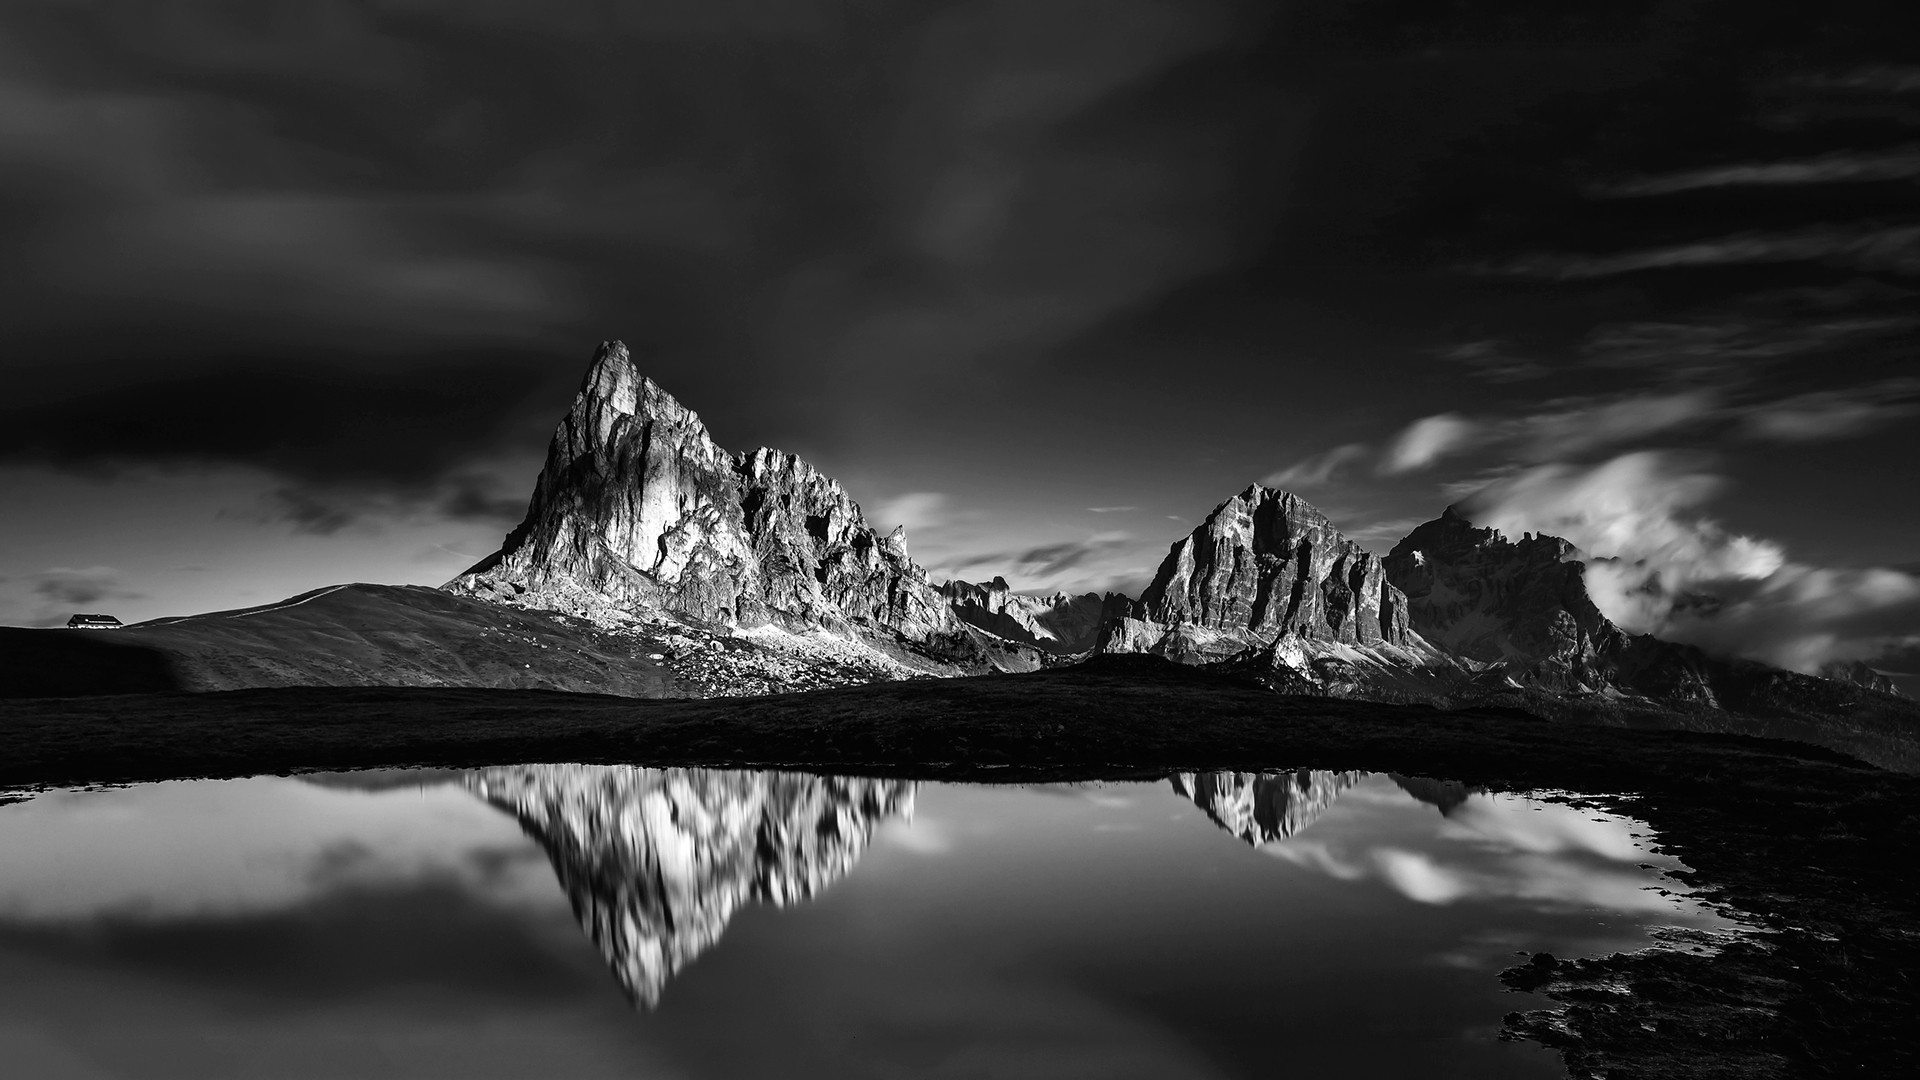 Nature Landscape Mountains Clouds Dolomites Mountains Lake Water House Reflection Monochrome 1920x1080